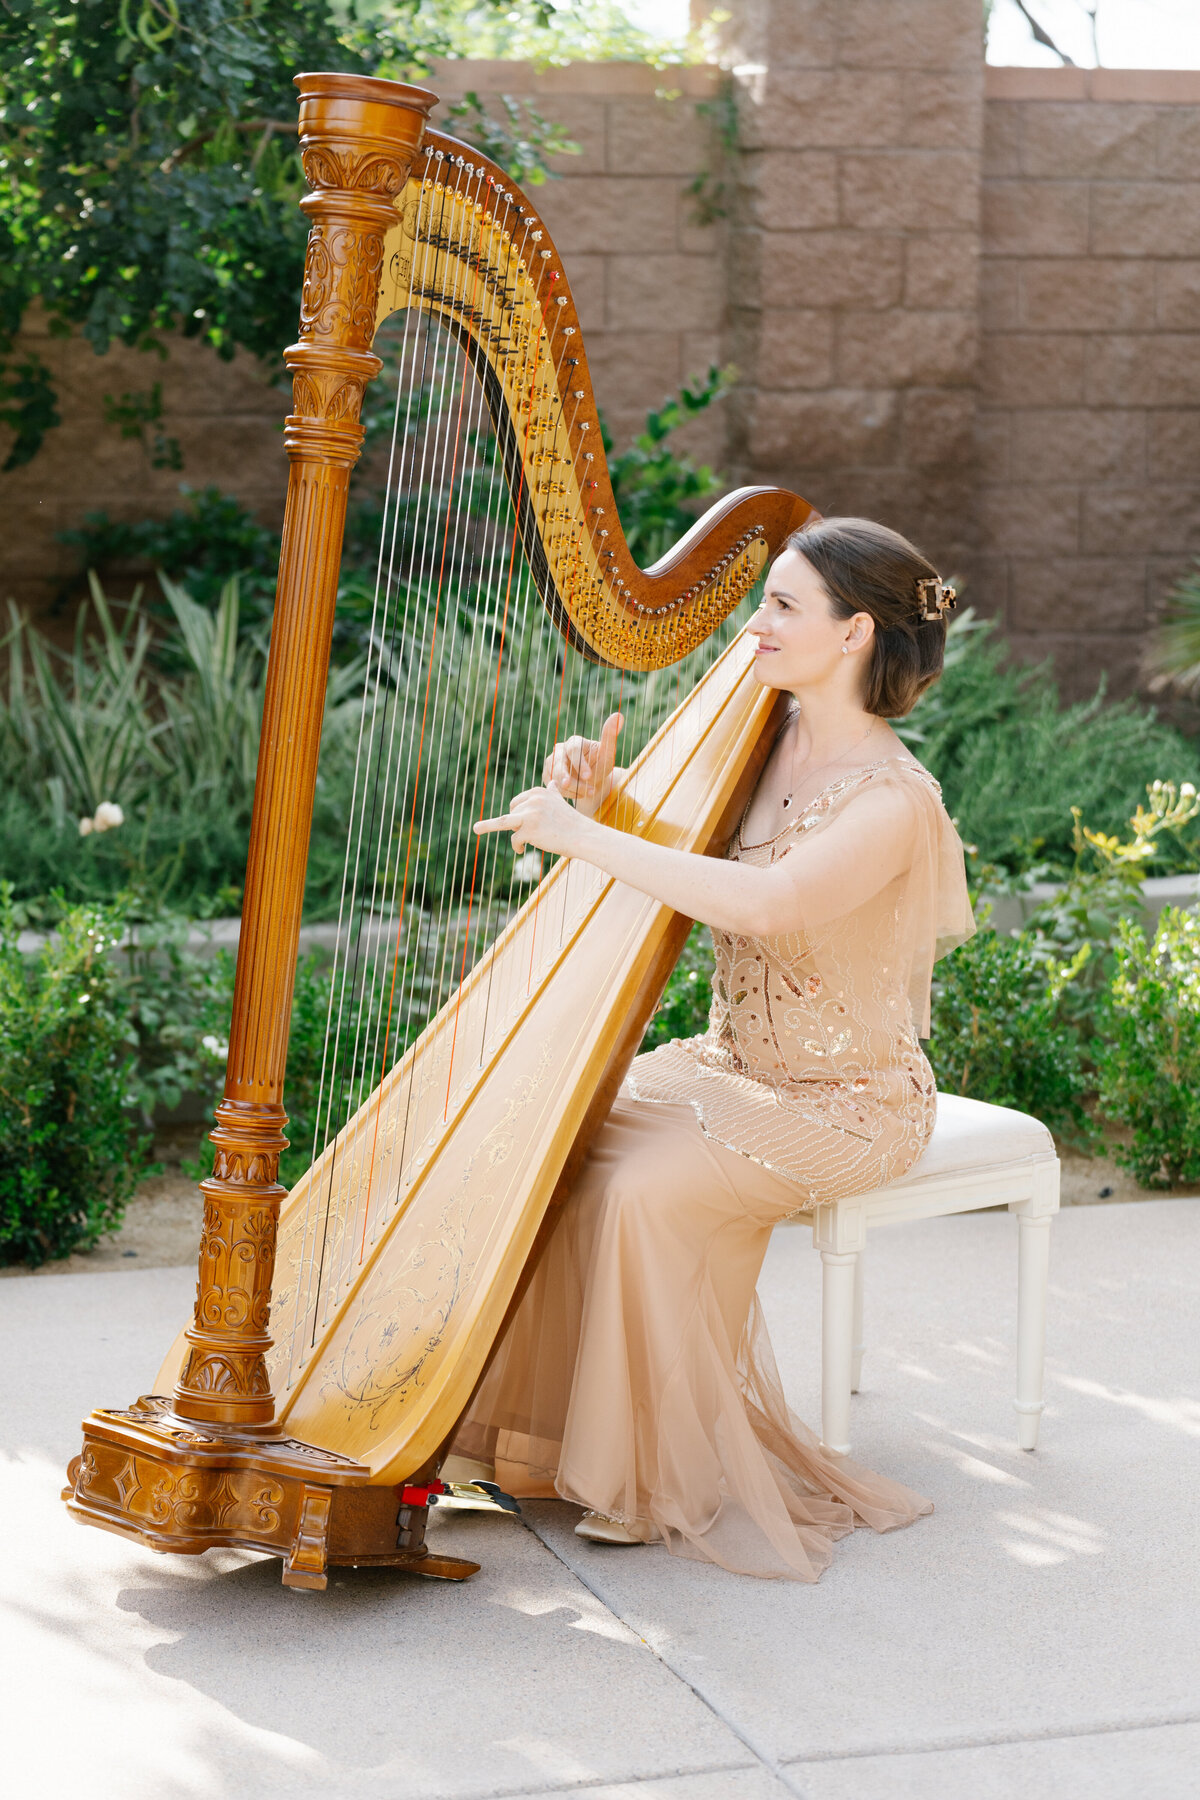 Kristie Smith, delivering an enchanting performance of harp wedding songs during a picturesque outdoor ceremony at DragonRidge Country Club.